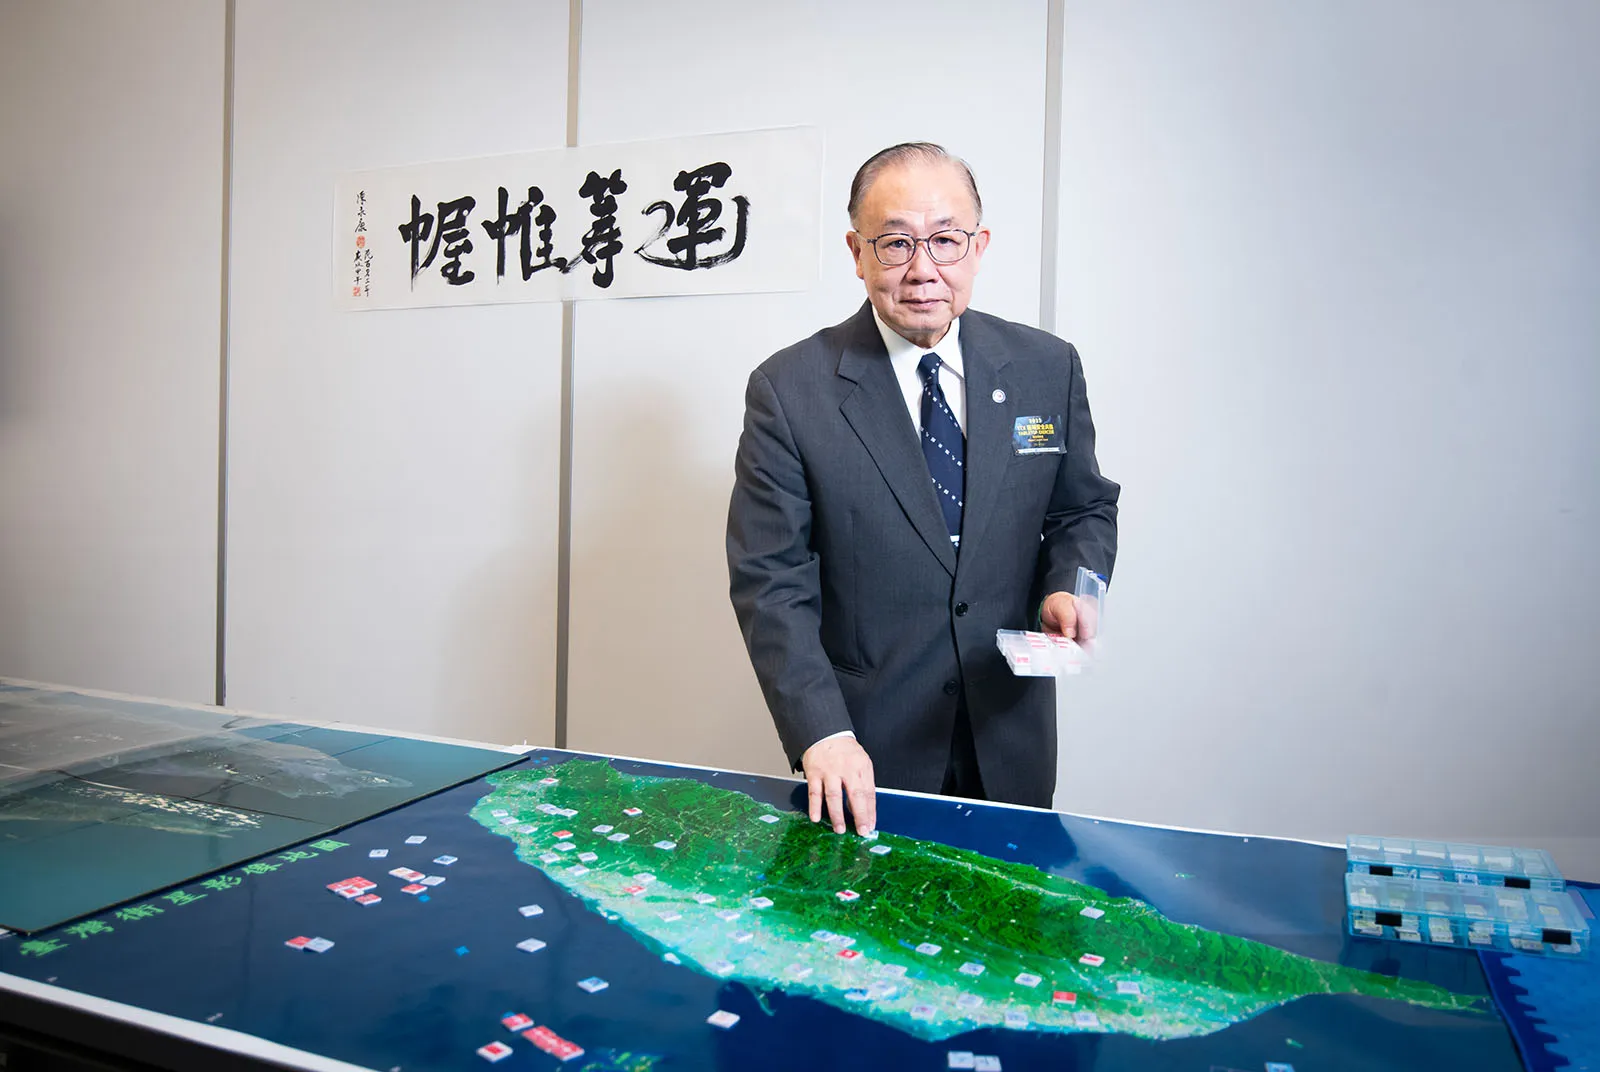 What can we learn from Taiwan's first civilian-led war game?